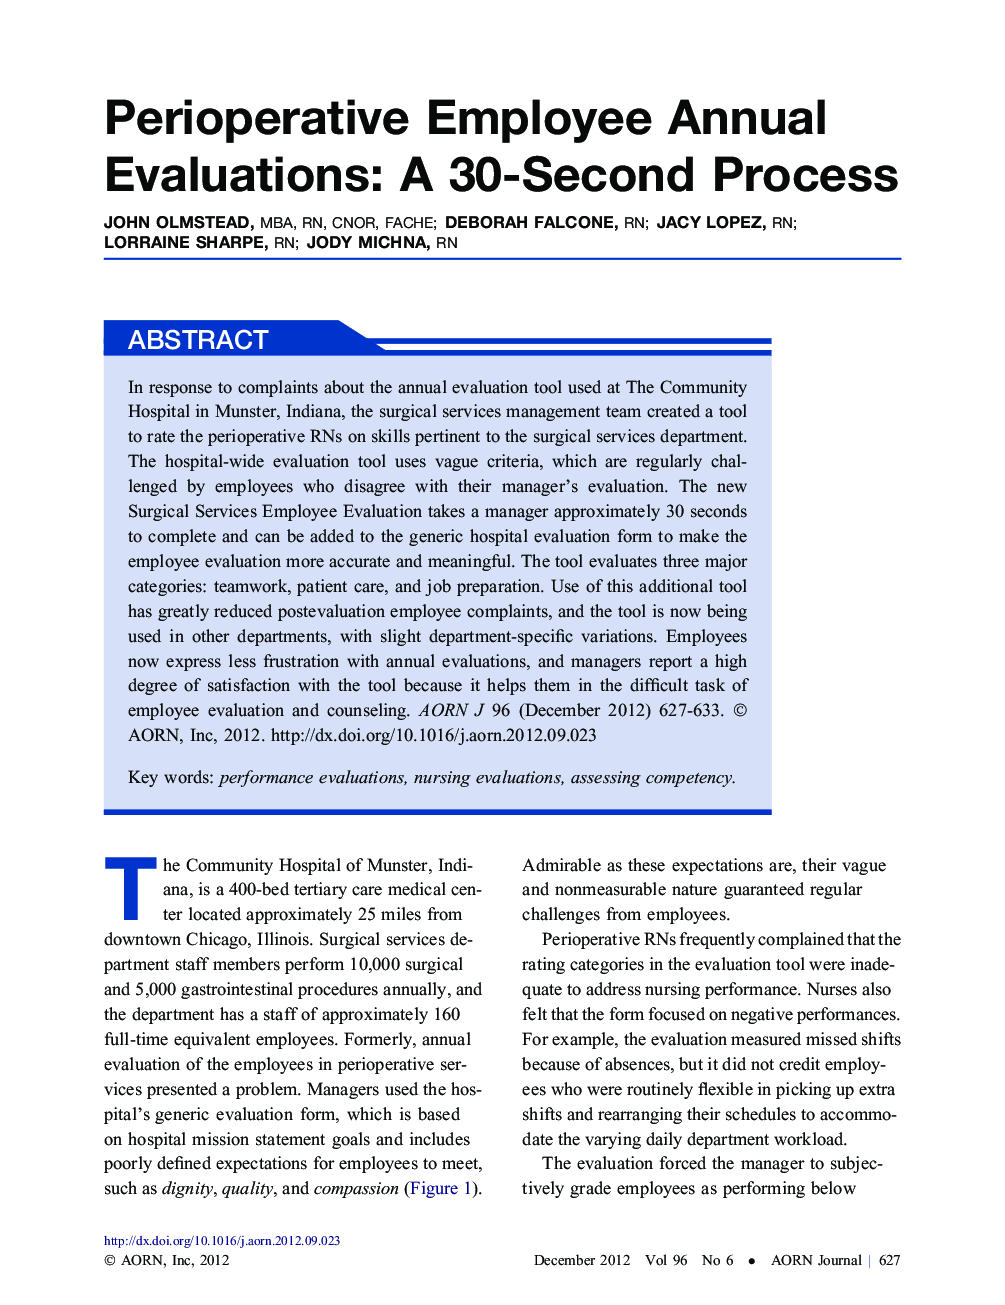 Perioperative Employee Annual Evaluations: A 30-Second Process